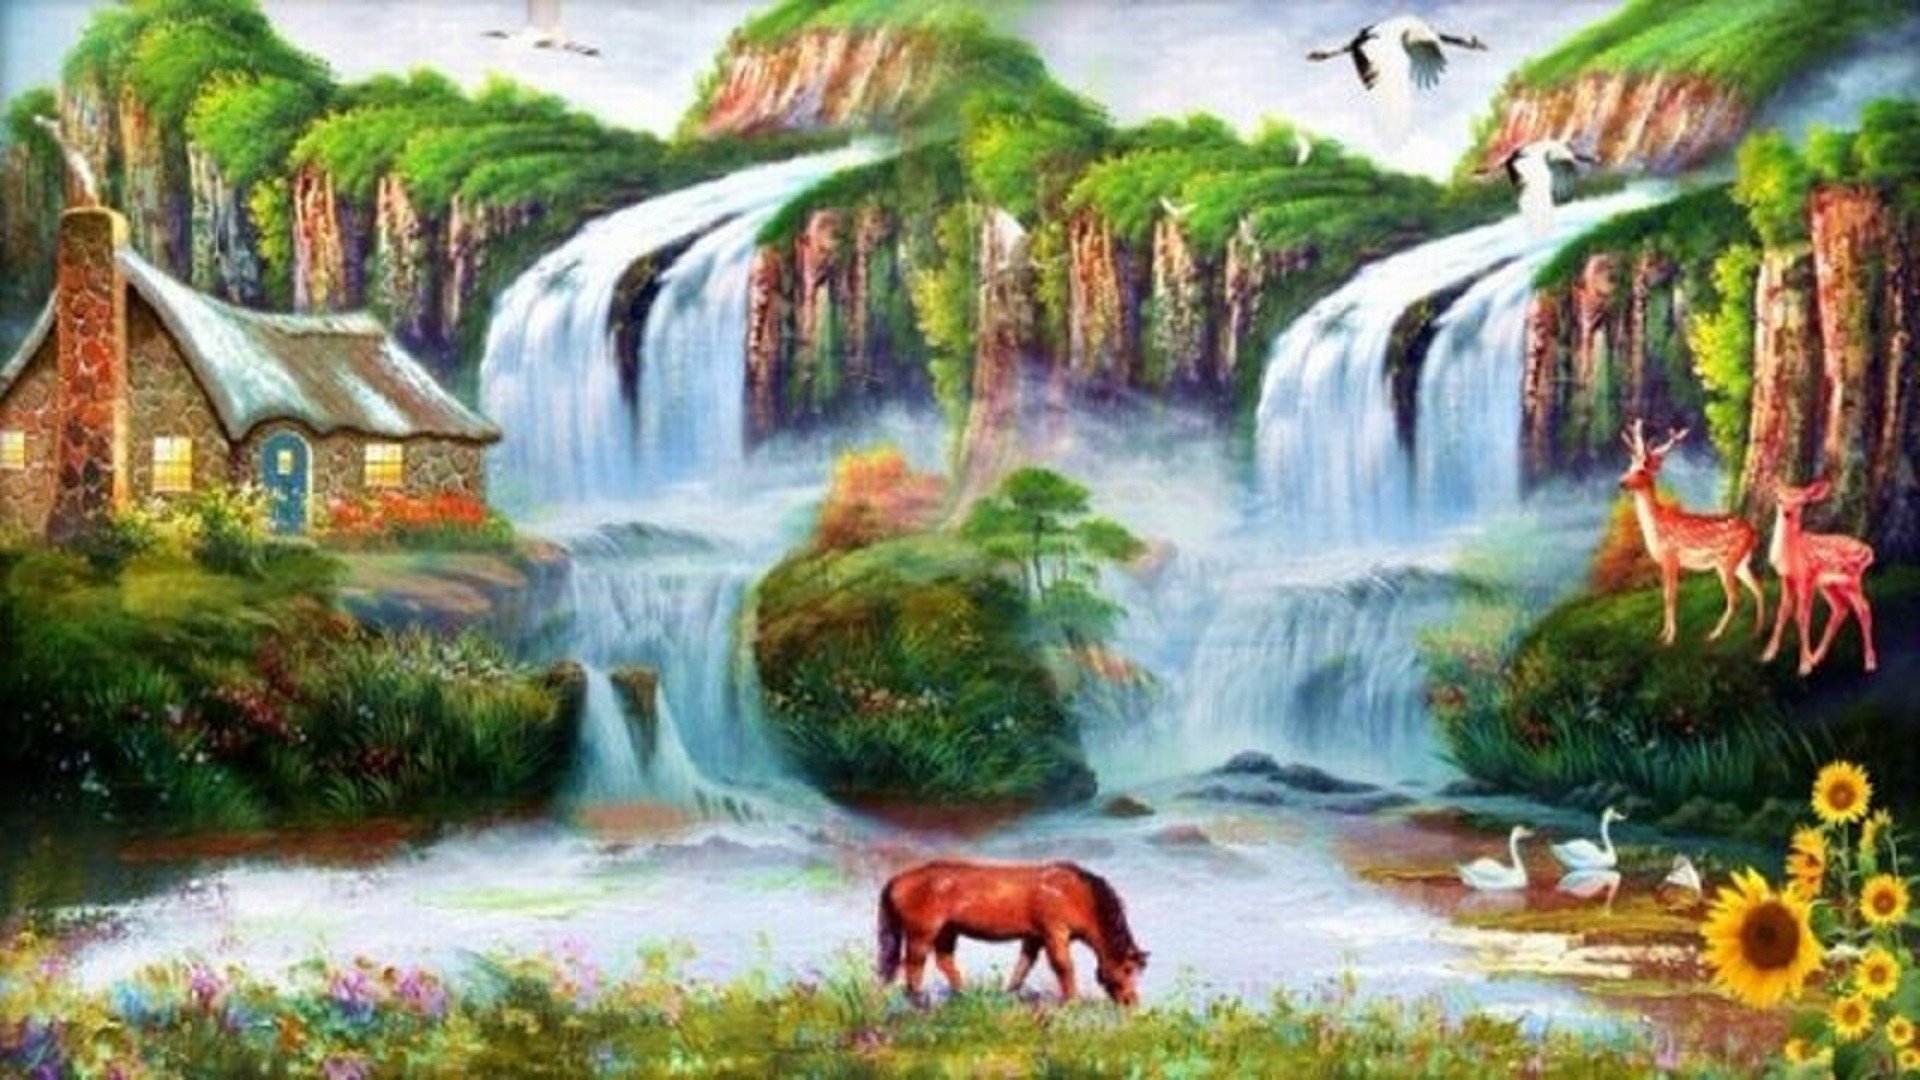 1920x1080 Most beautiful waterfalls painting in oils photography. Painting falling  water can be a difficulty for newbies.